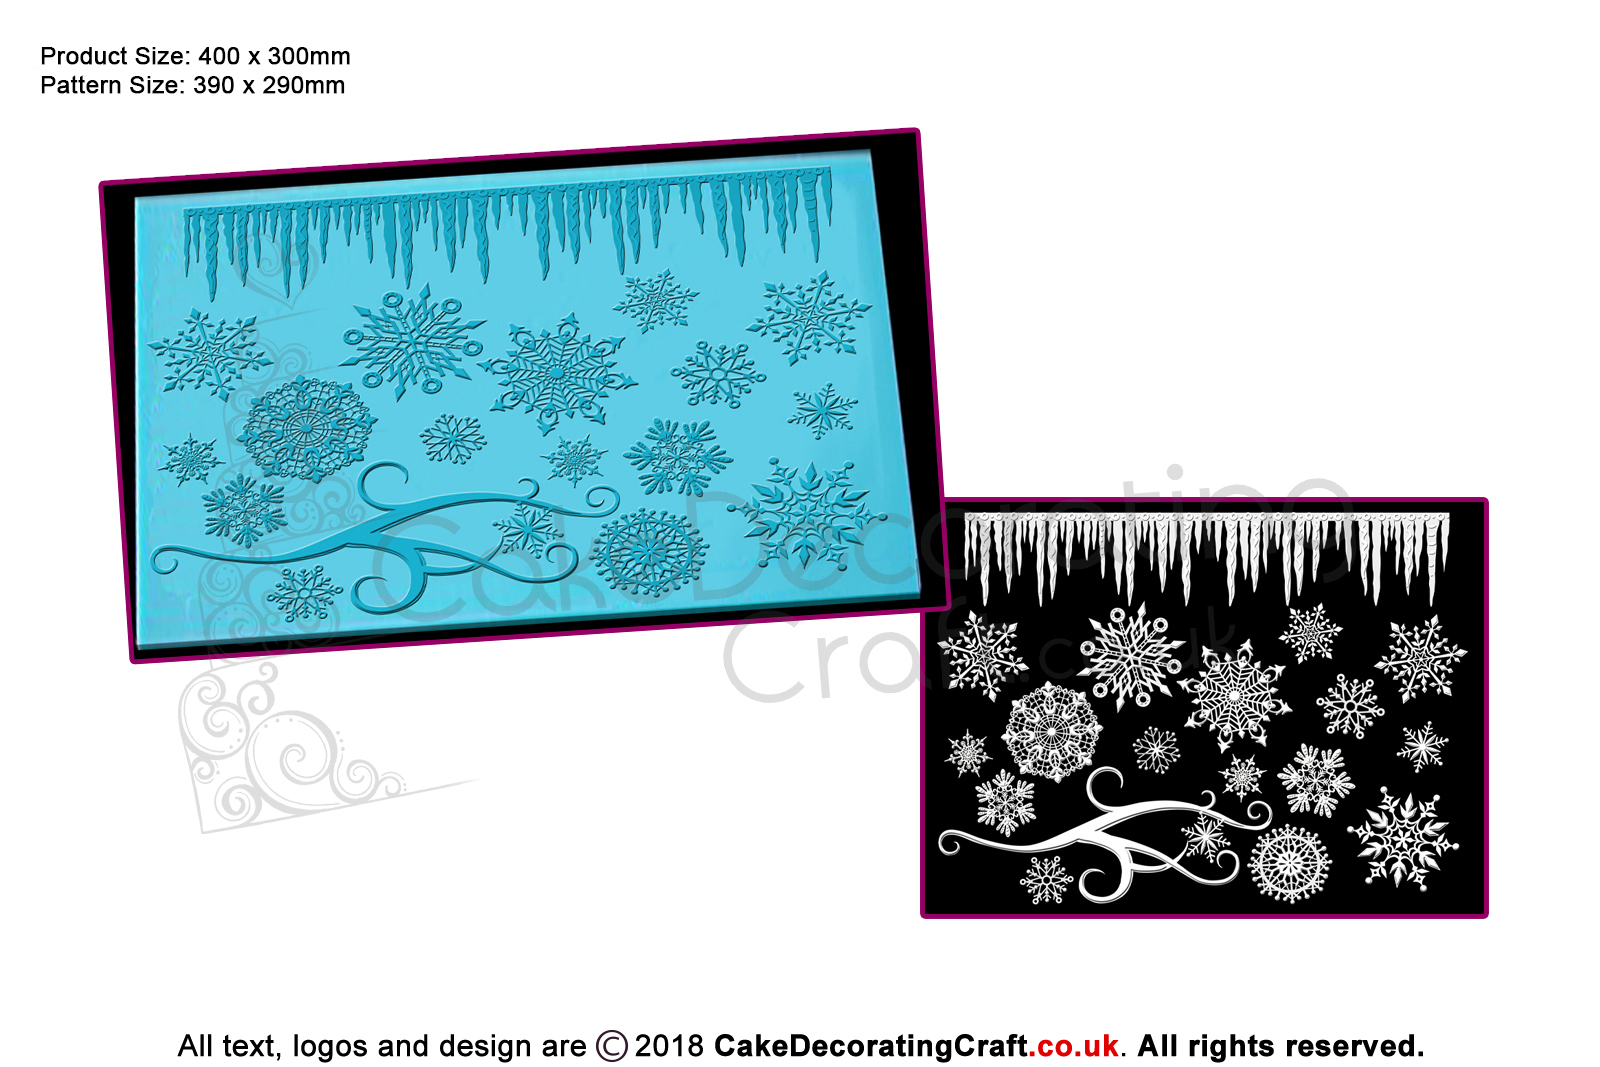 3D Frozen Crystals | Cake Lace Mats for Edible Cake Lace Mixes and Premixes | Cake Decorating Craft Tool | Great Christmas Bake Off